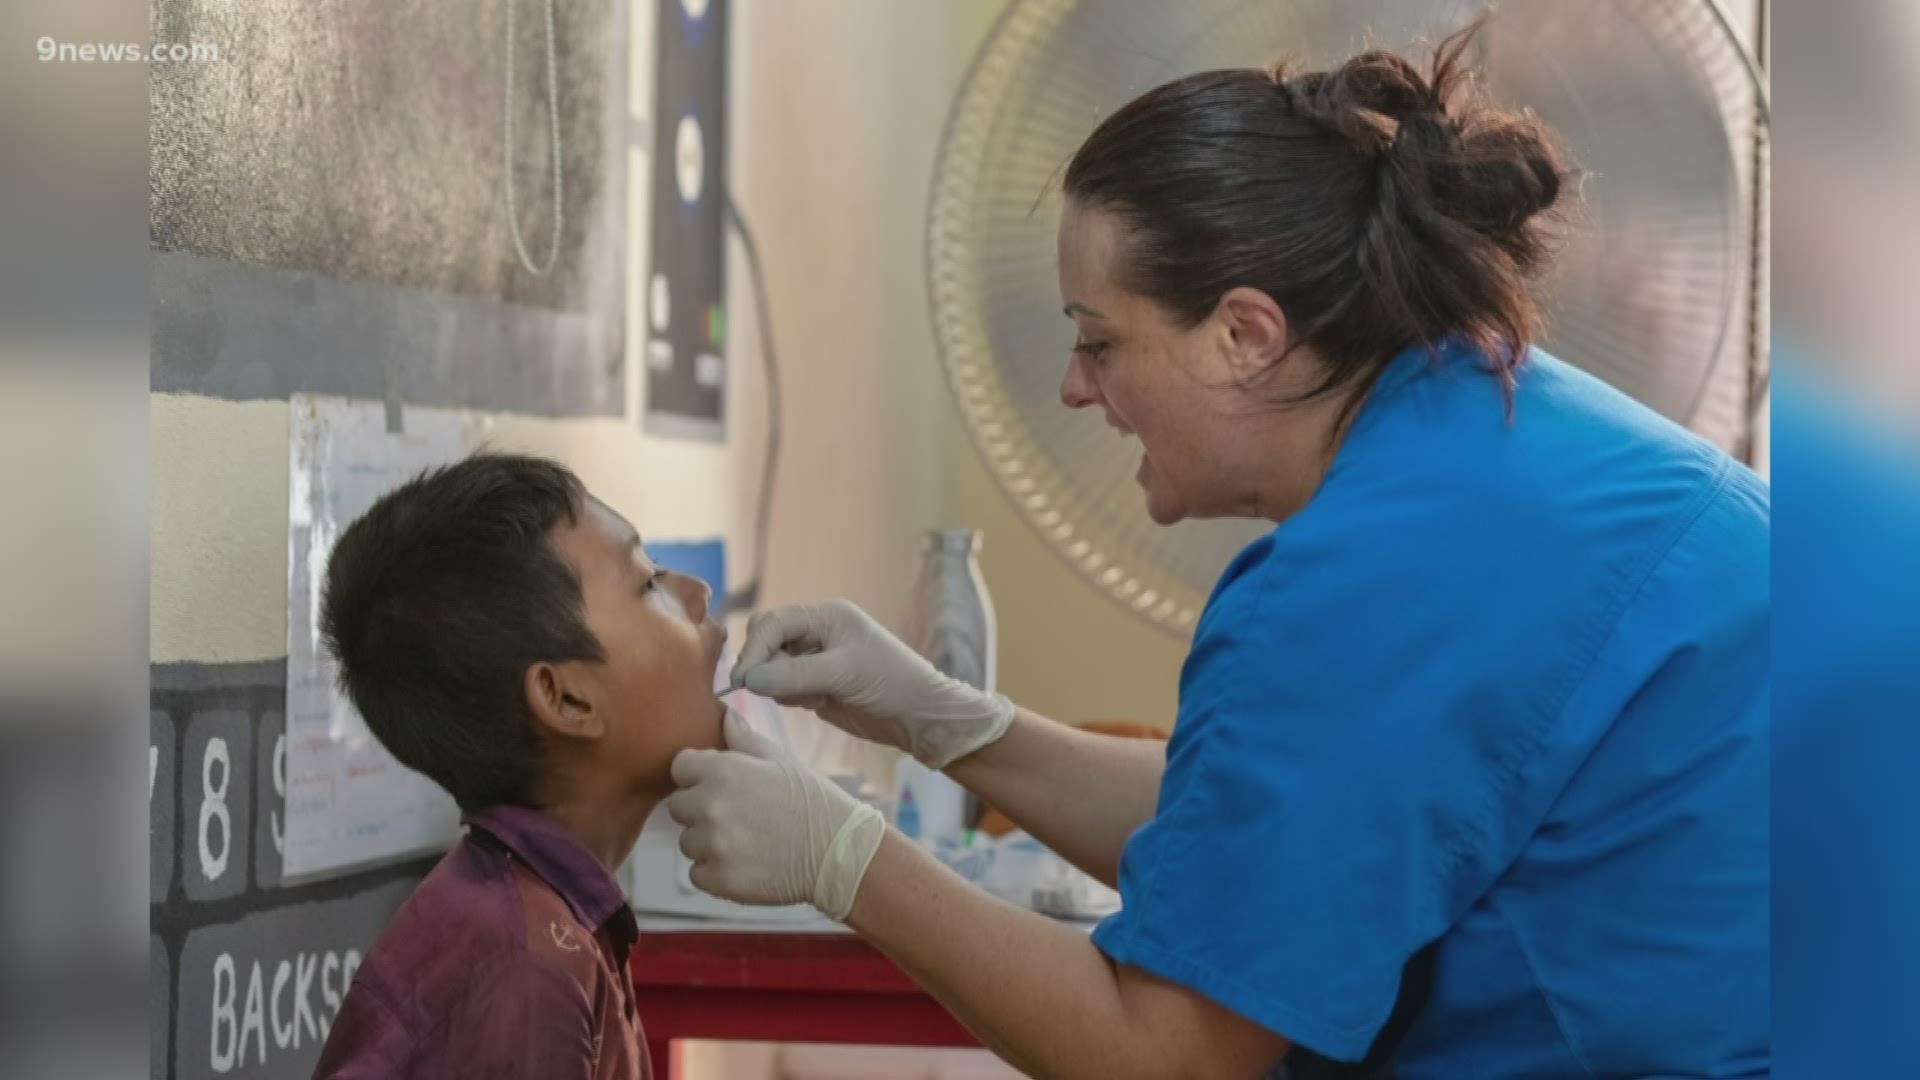 The goal of the Colorado based Global Dental Relief is to provide free dental care to children in places like Nepal, Kenya and Cambodia.